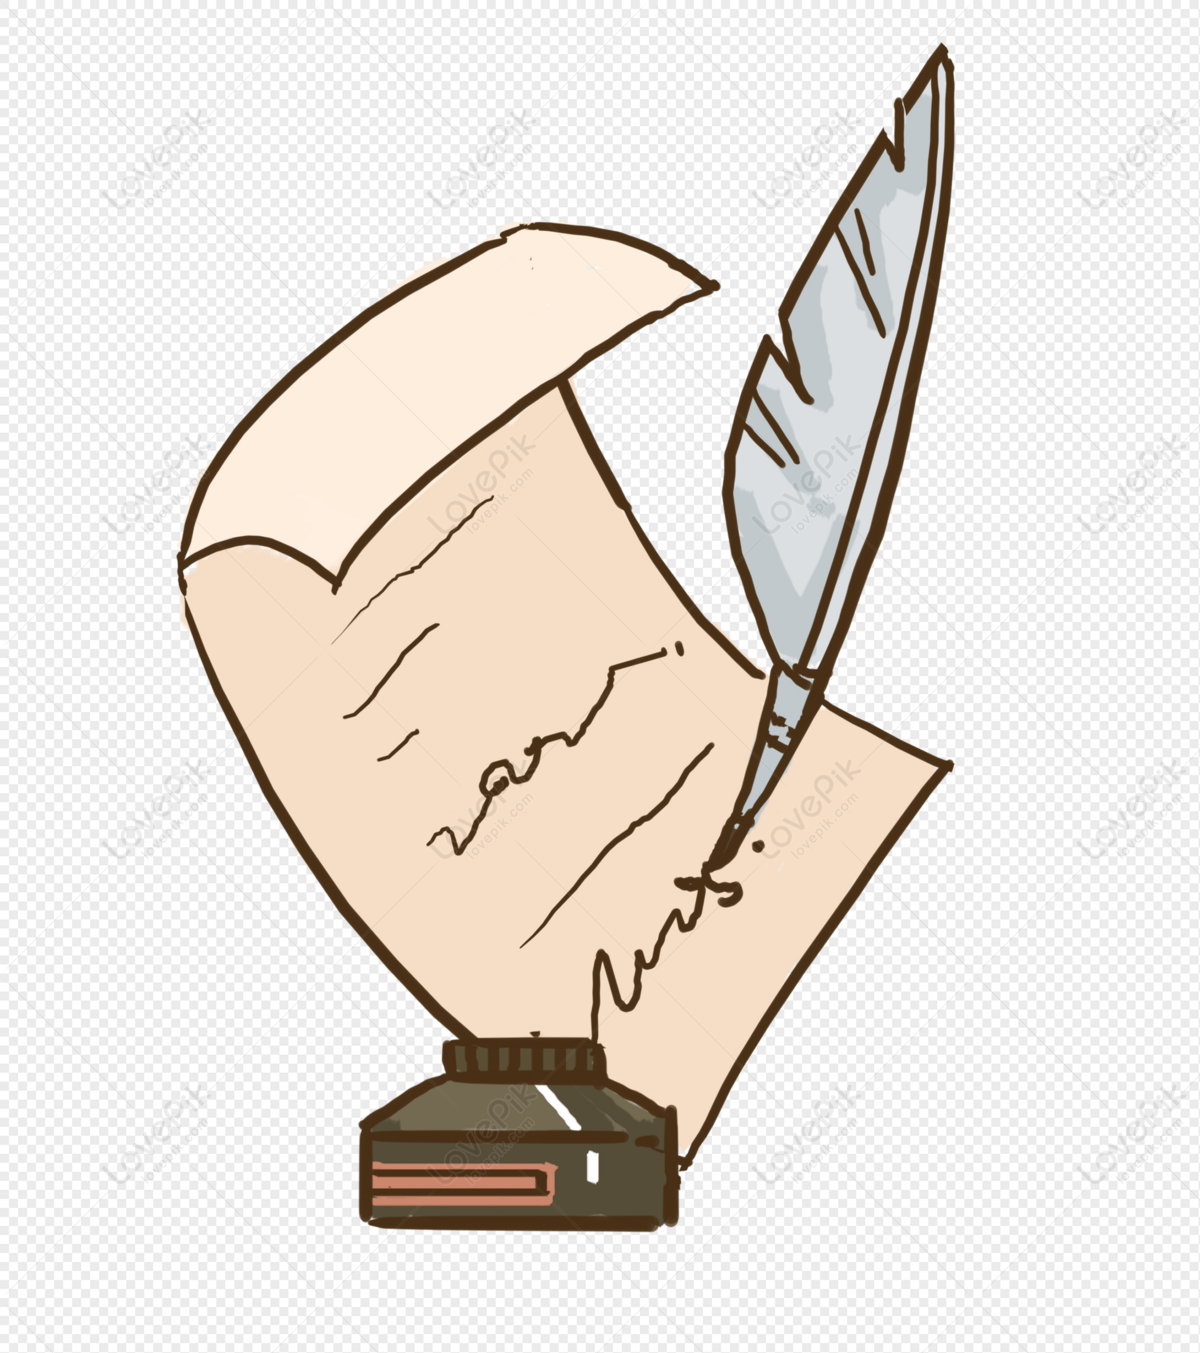 feather ink png